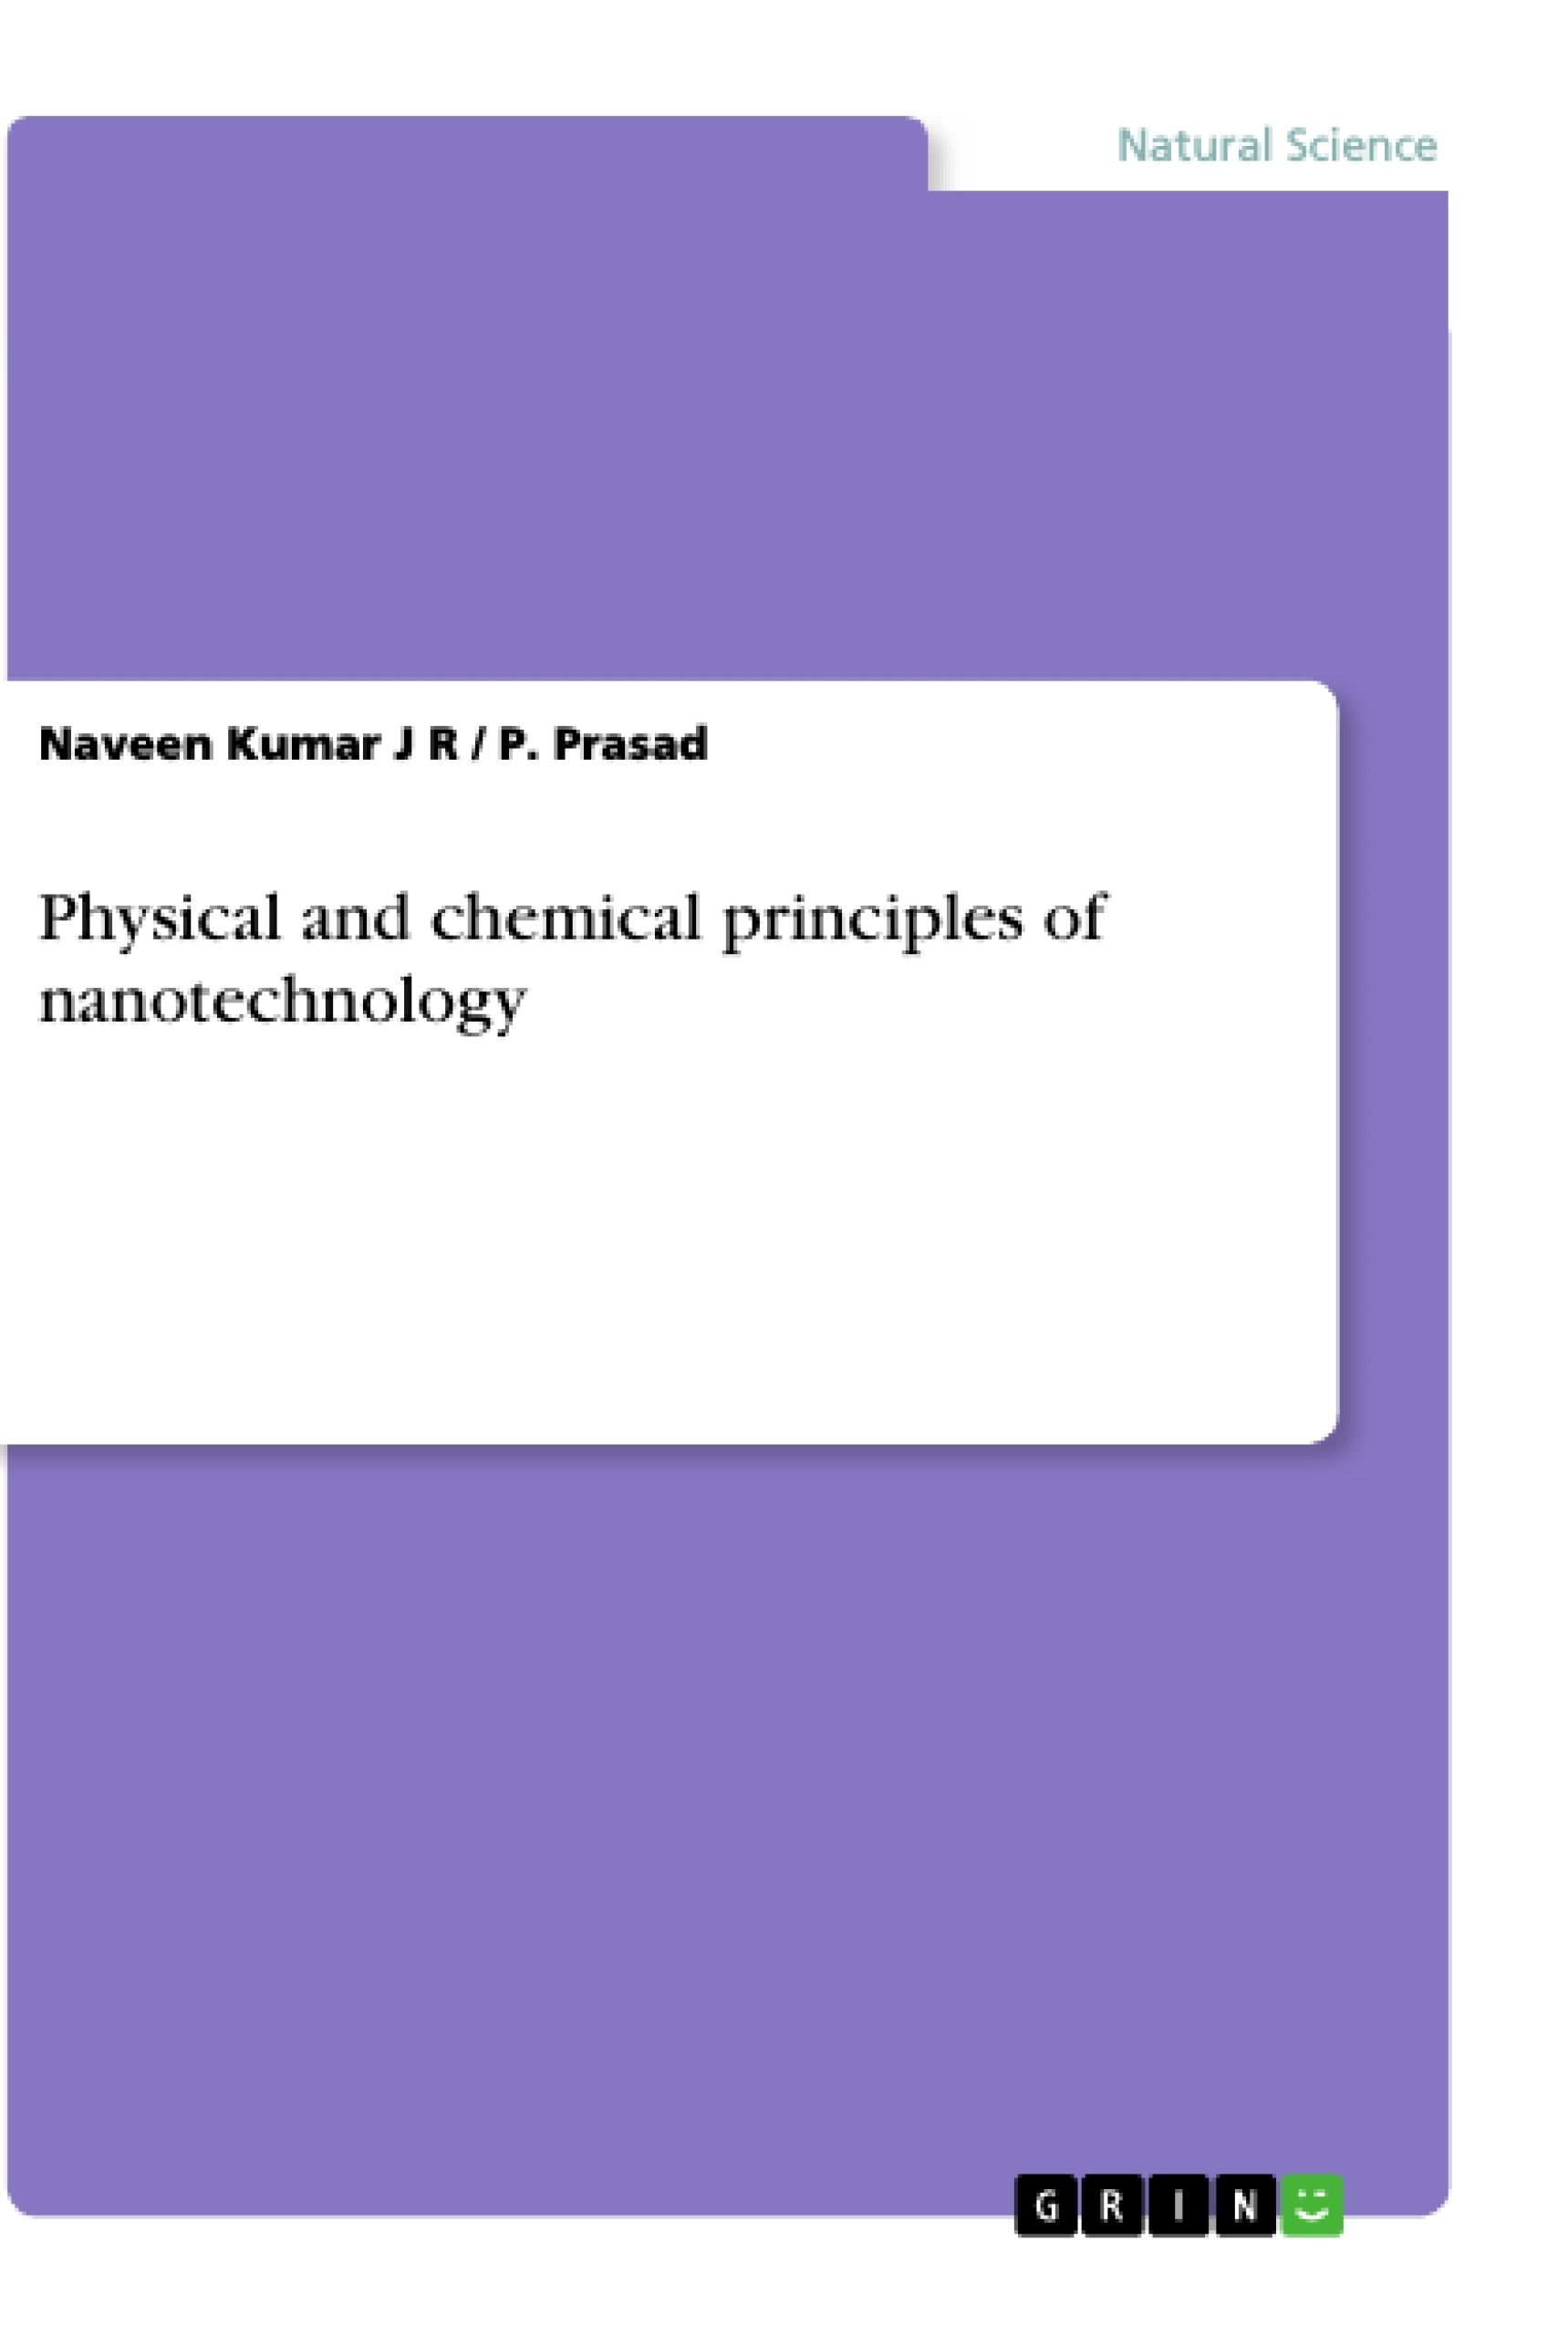 Title: Physical and chemical principles of nanotechnology